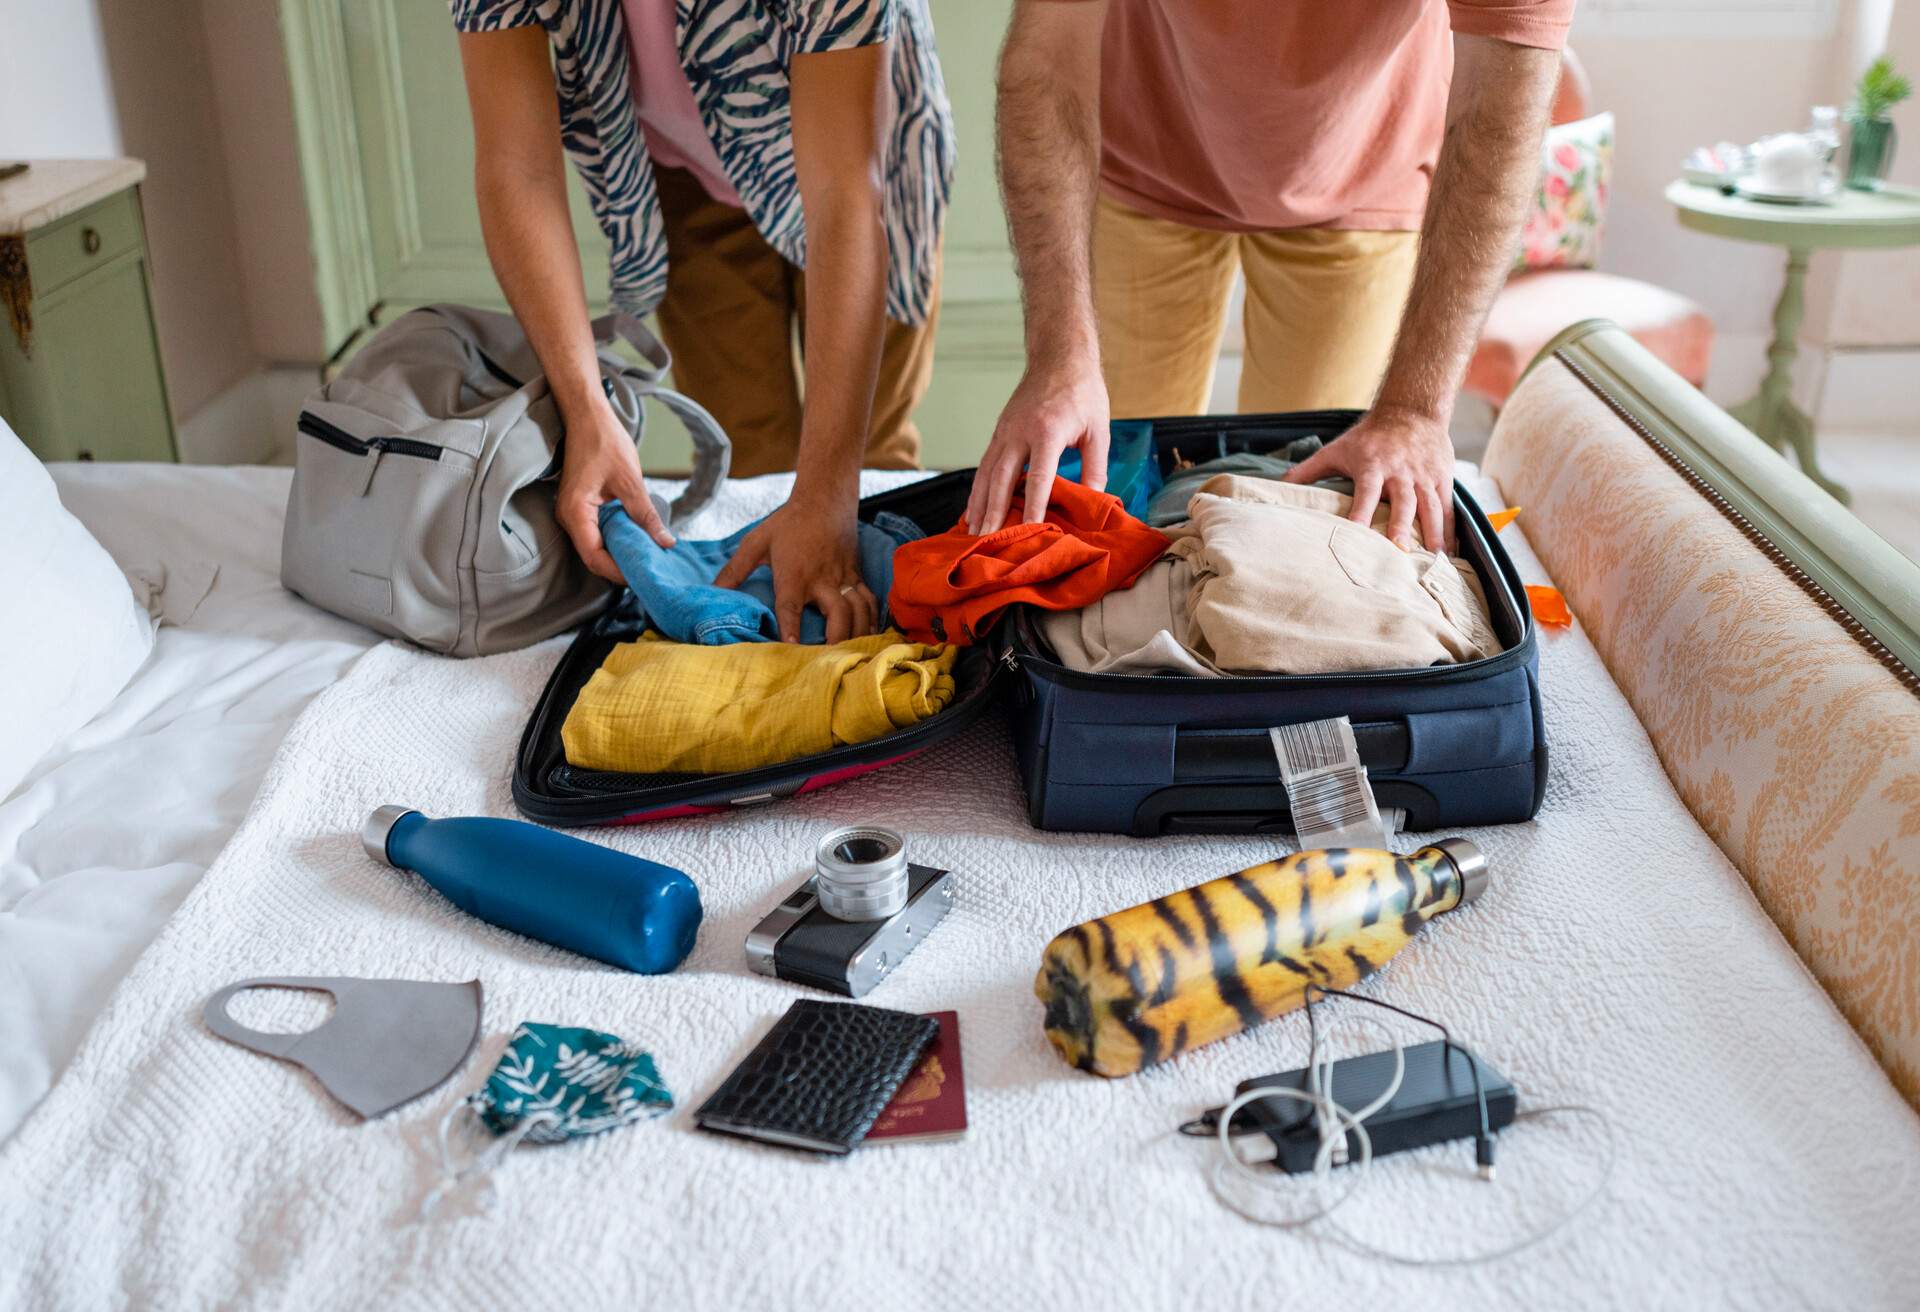 Two individual packs their stuff laid in bed inside a suitcase.